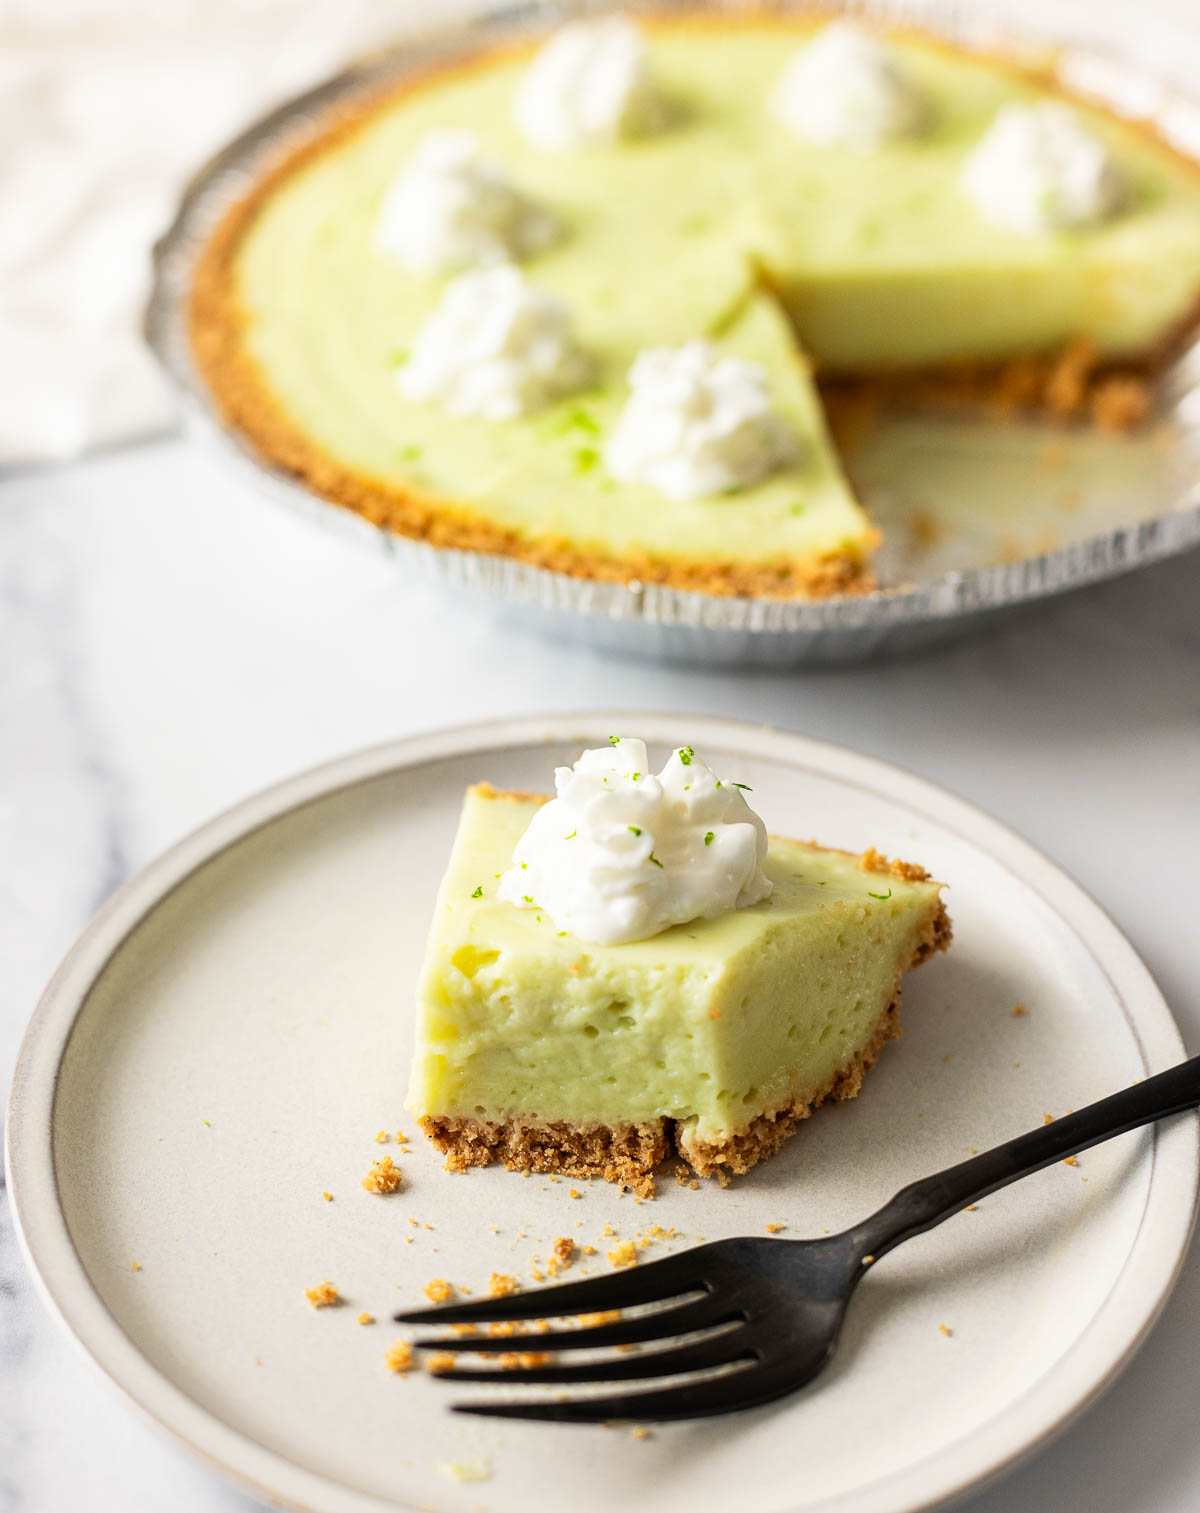 A slice of key lime pie with whipped cream on a plate, with the rest of the key lime pie in the background.